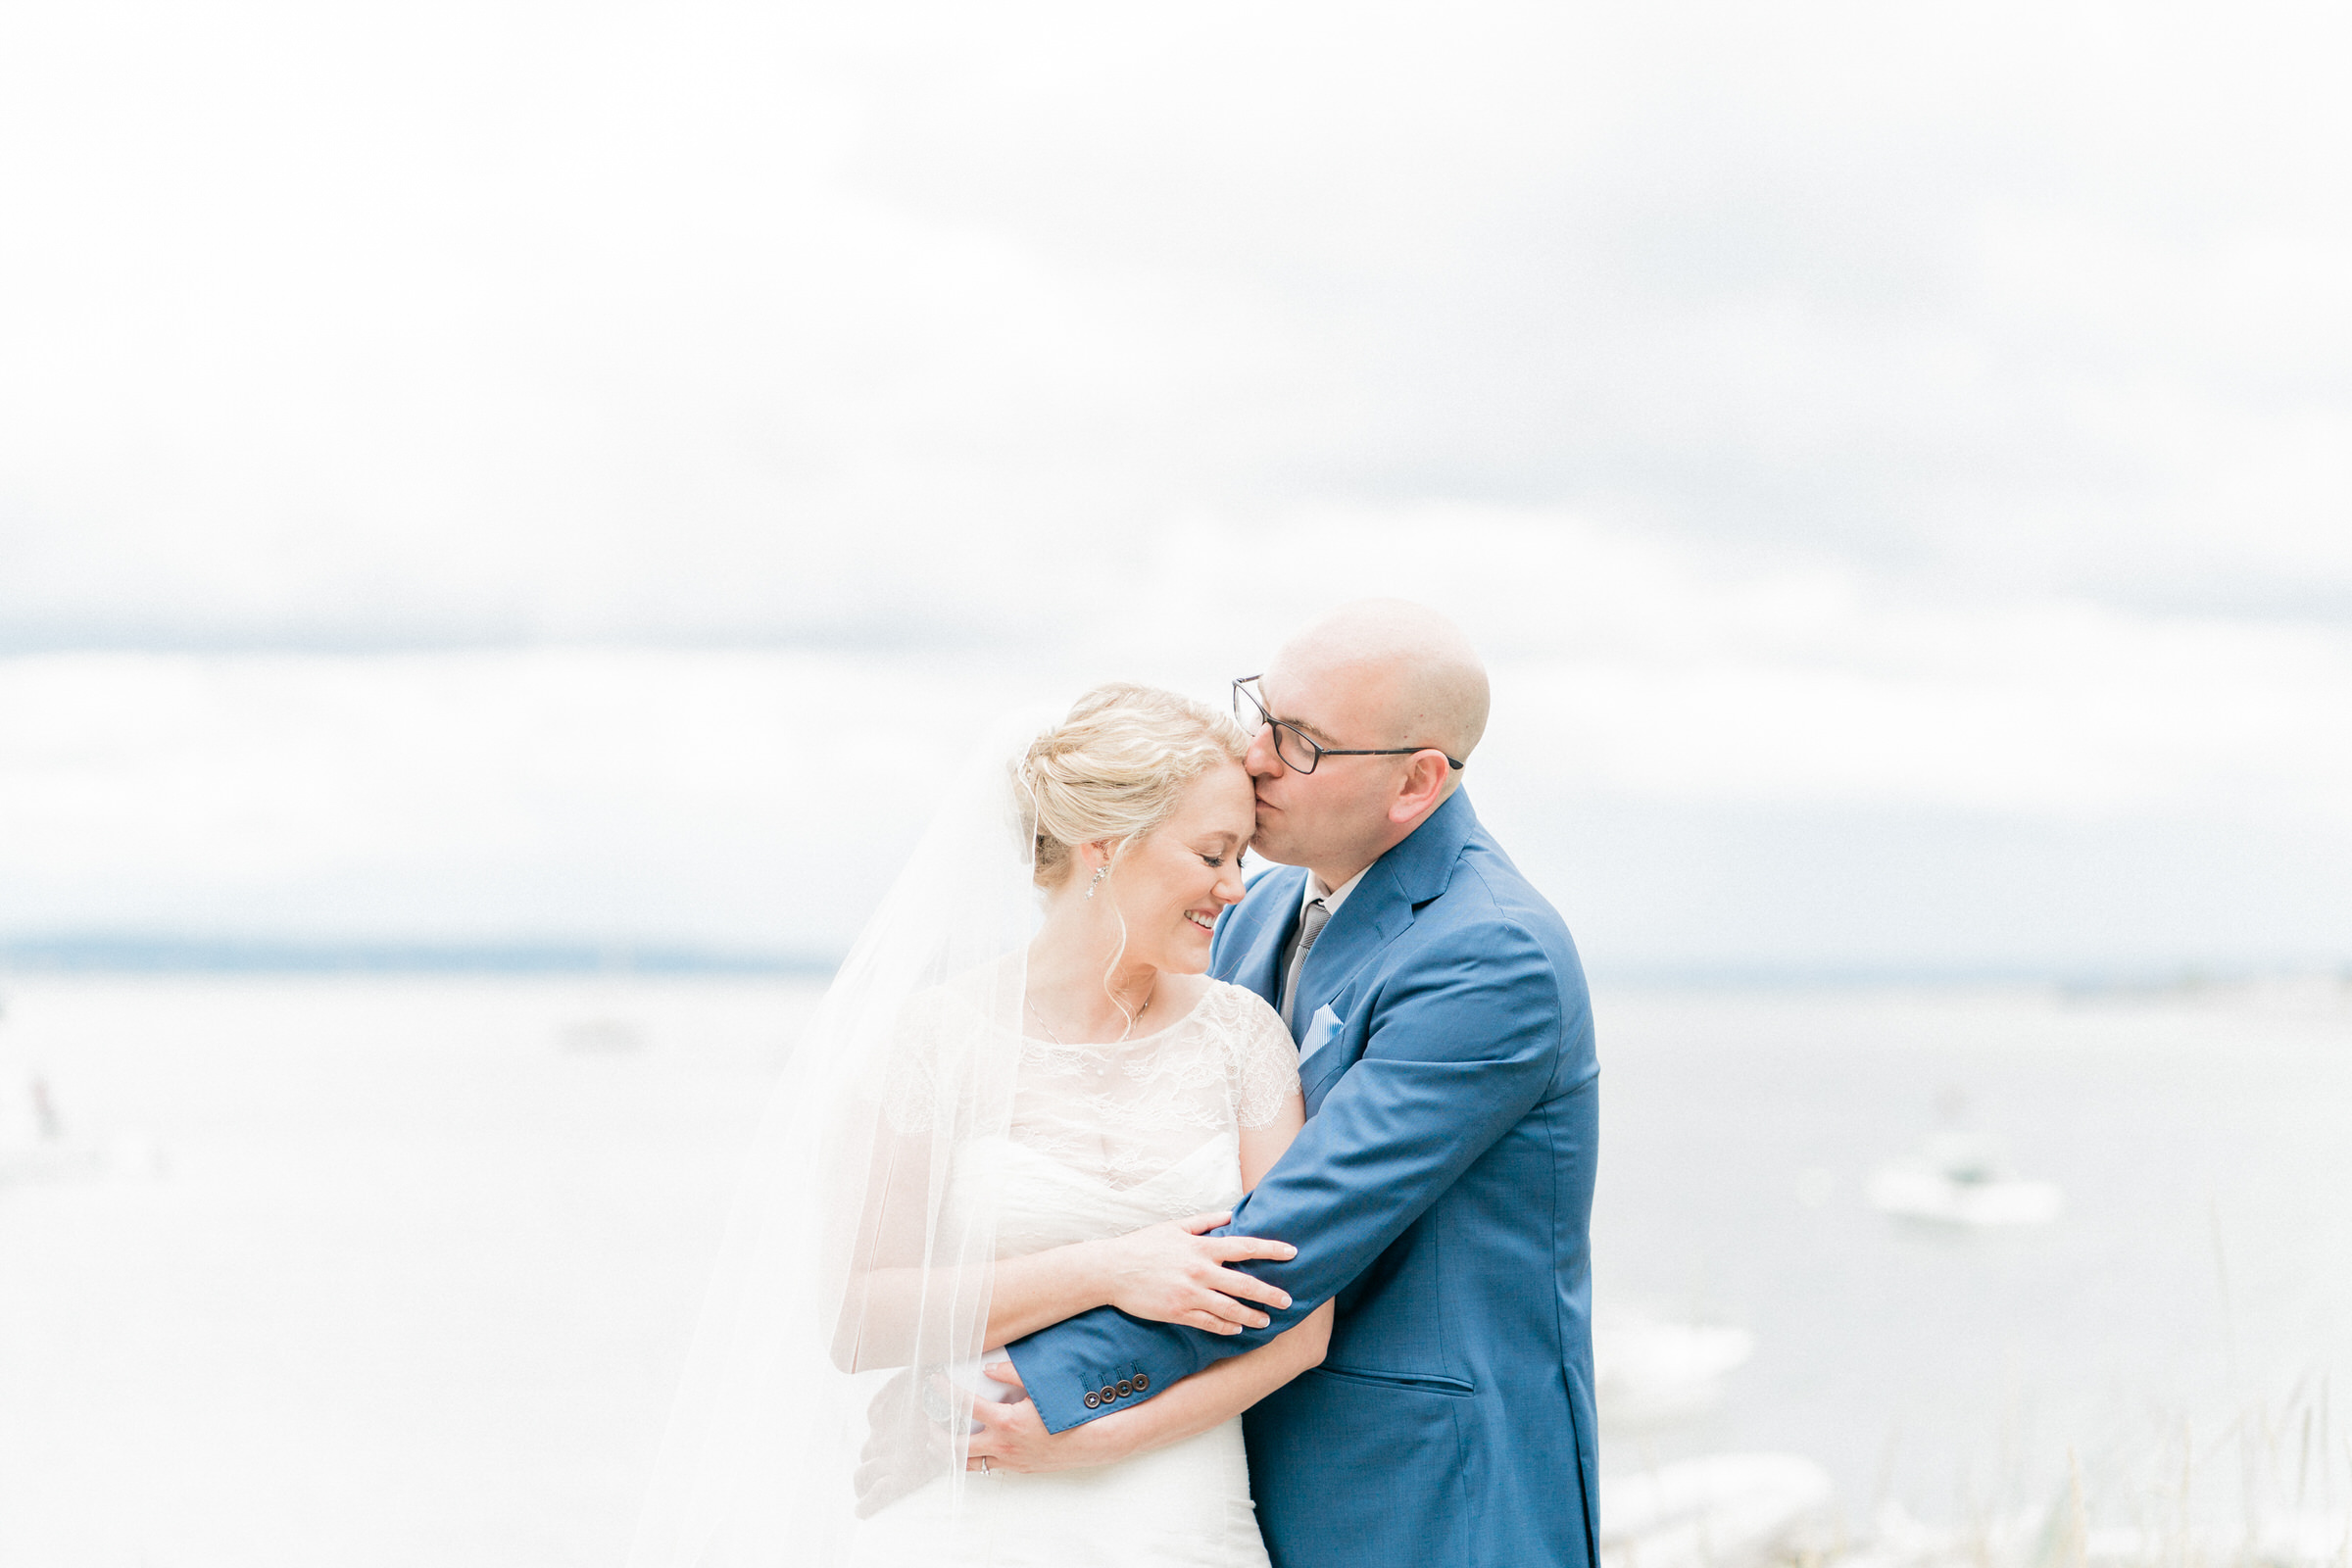 Boatyard Inn Whidbey Island wedding: Lovely moment of Sara and Joe after their First Look.